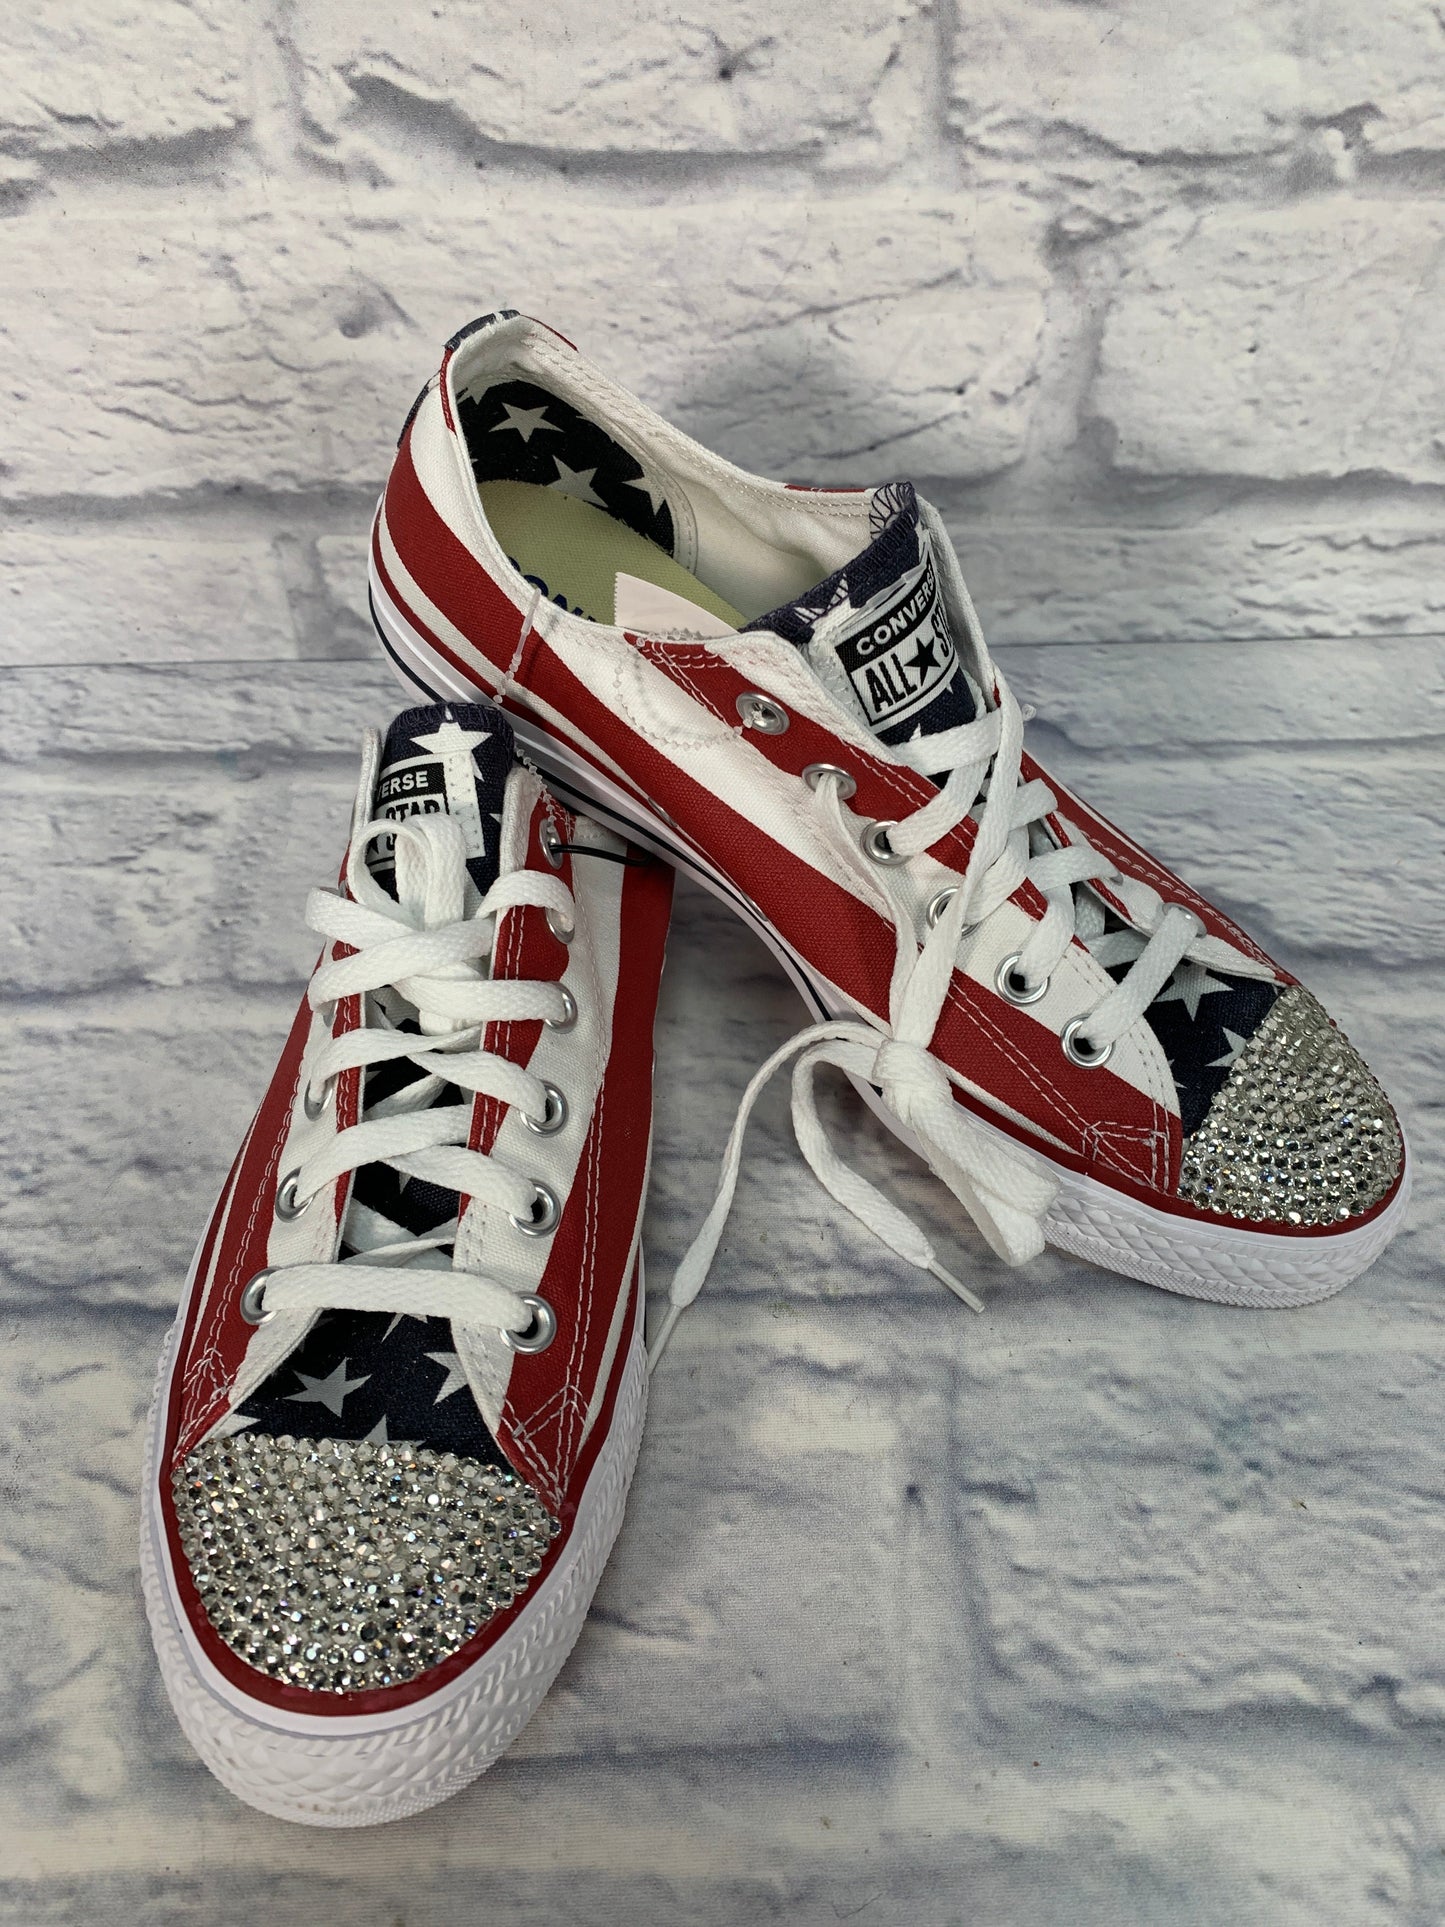 Blue & Red & White Shoes Sneakers Converse, Size 10